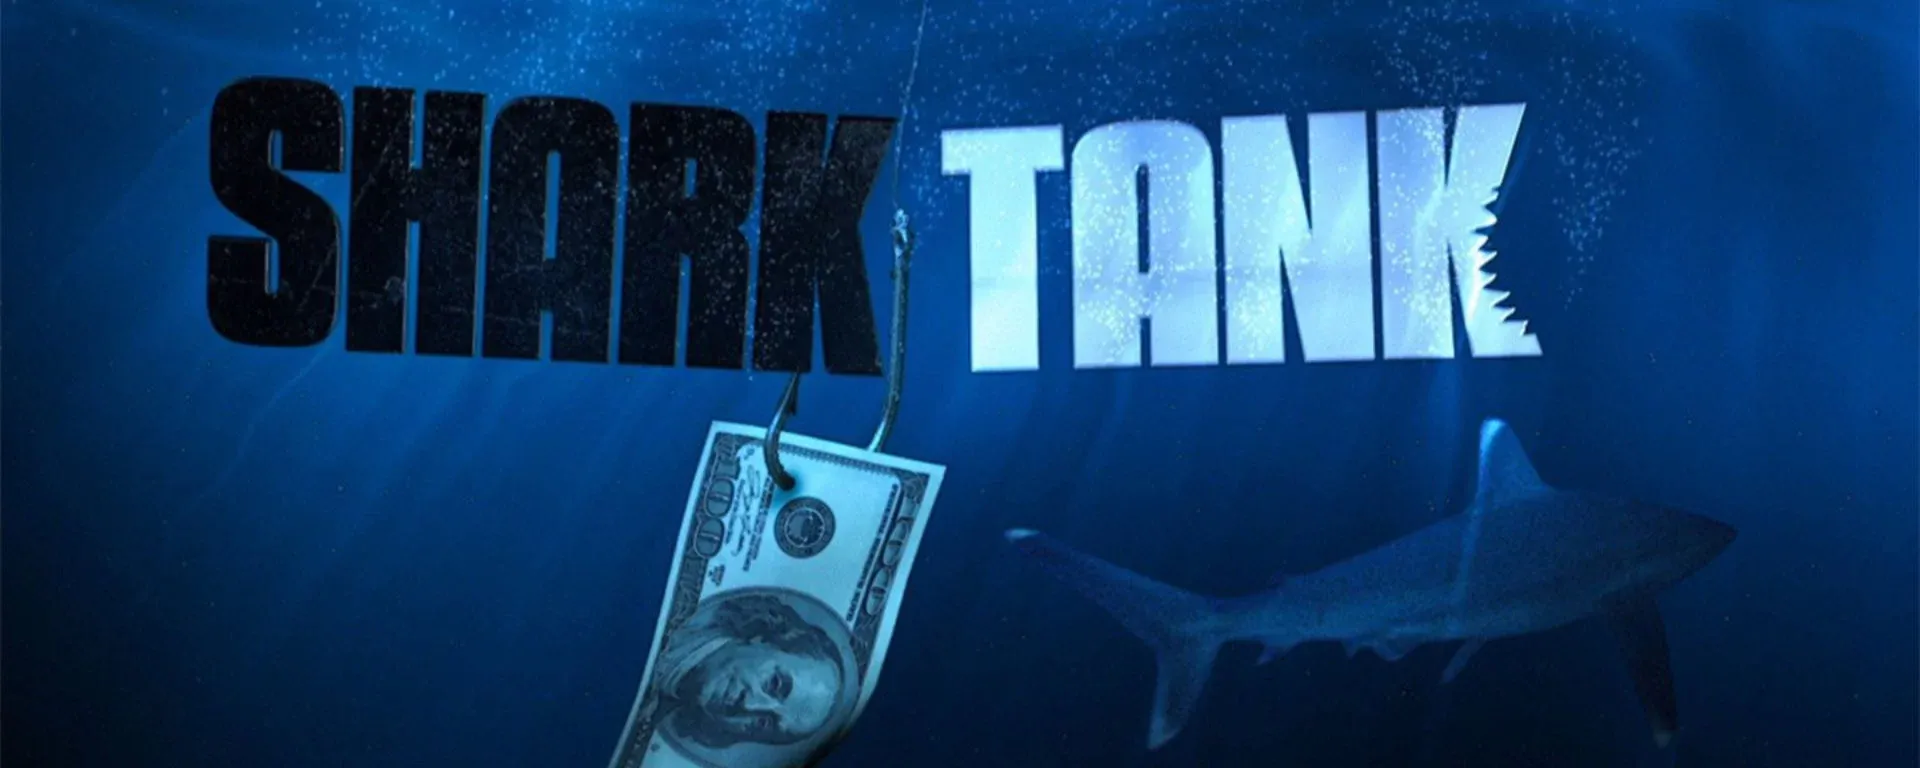 Graphic for Shark Tank